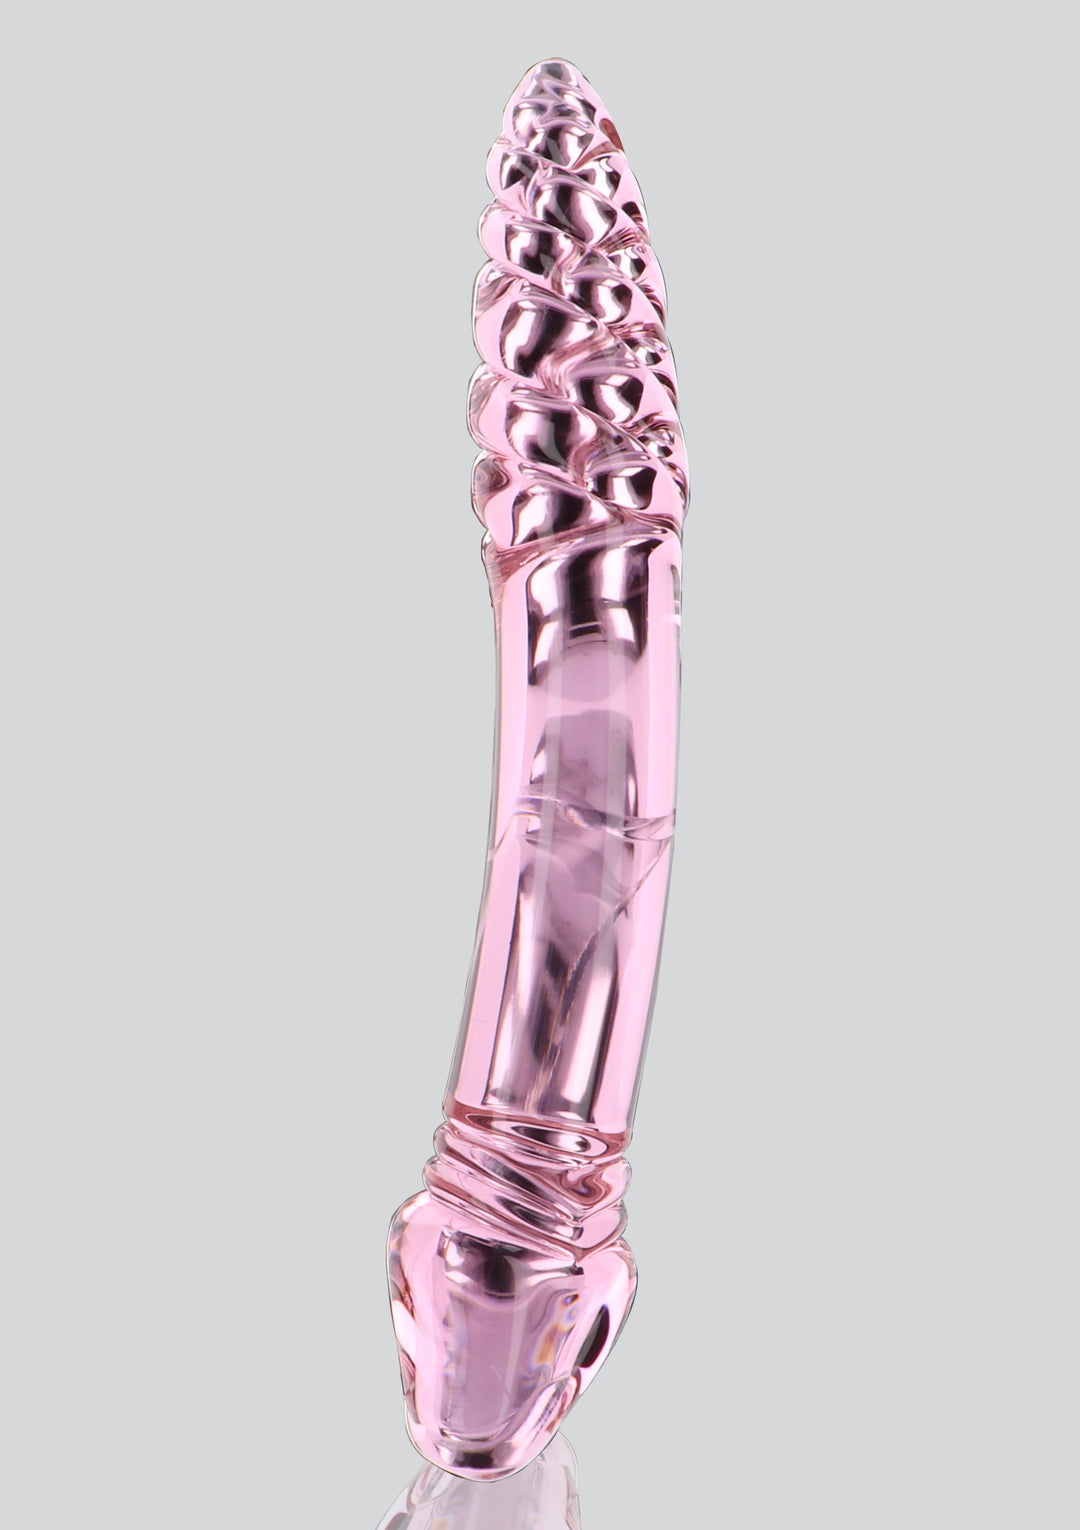 Double vaginal anal phallus Rhinestone Scepter in glass